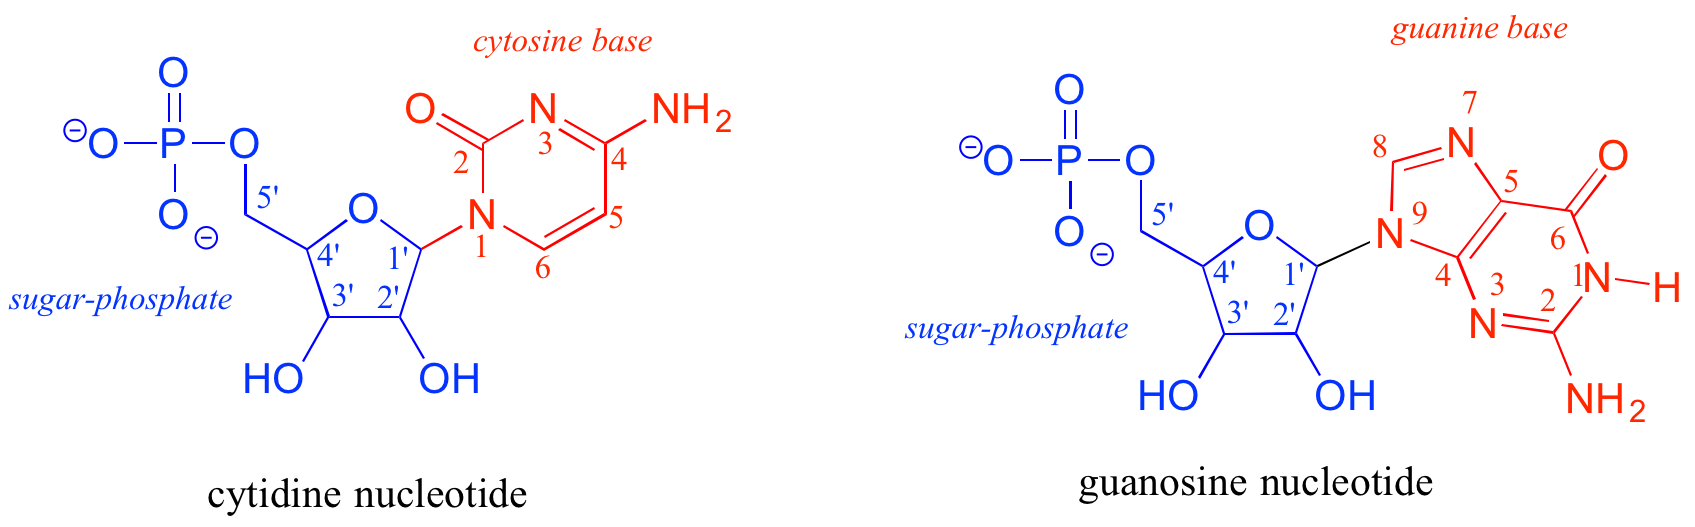 Left: cytidine nucleotide; cytosine base in red and sugar-phosphate in blue. Right: Guanosine nucleotide; guanine base in red and sugar-phosphate in blue.